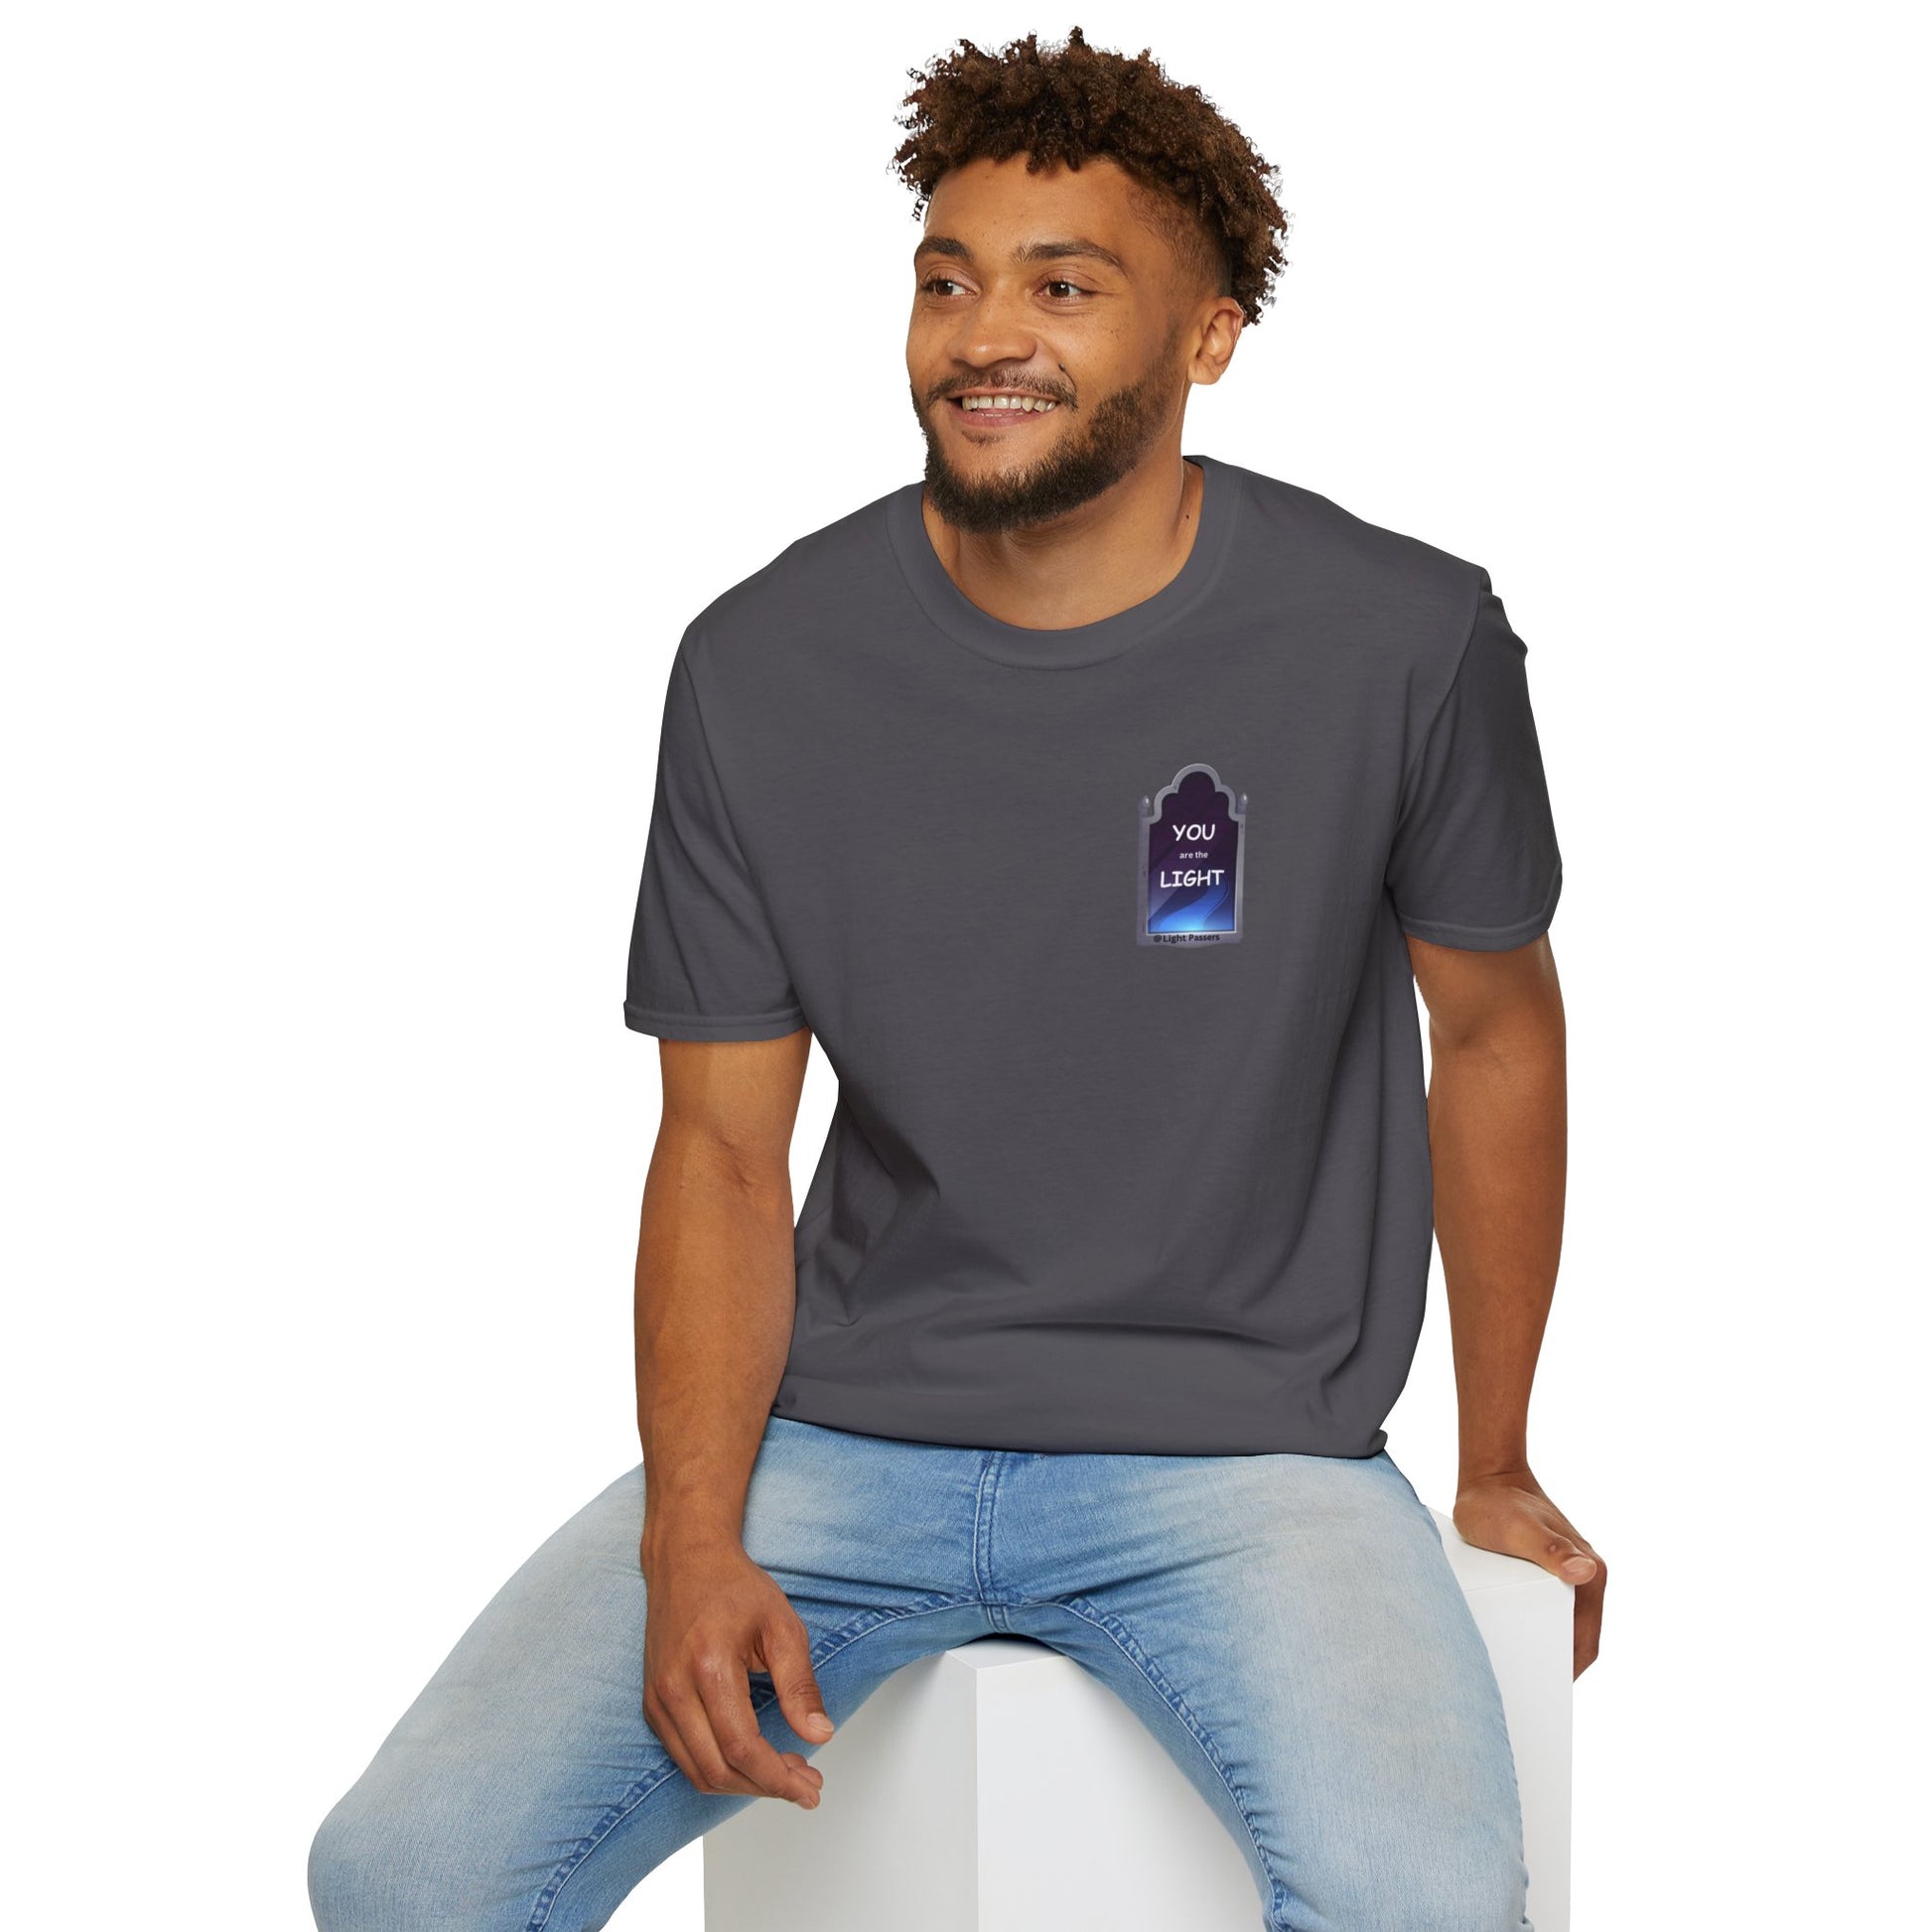 A man in a grey shirt sits on a cube, smiling with curly hair and a beard. Unisex heavy cotton tee, tear-away label, no side seams, for premium printing.